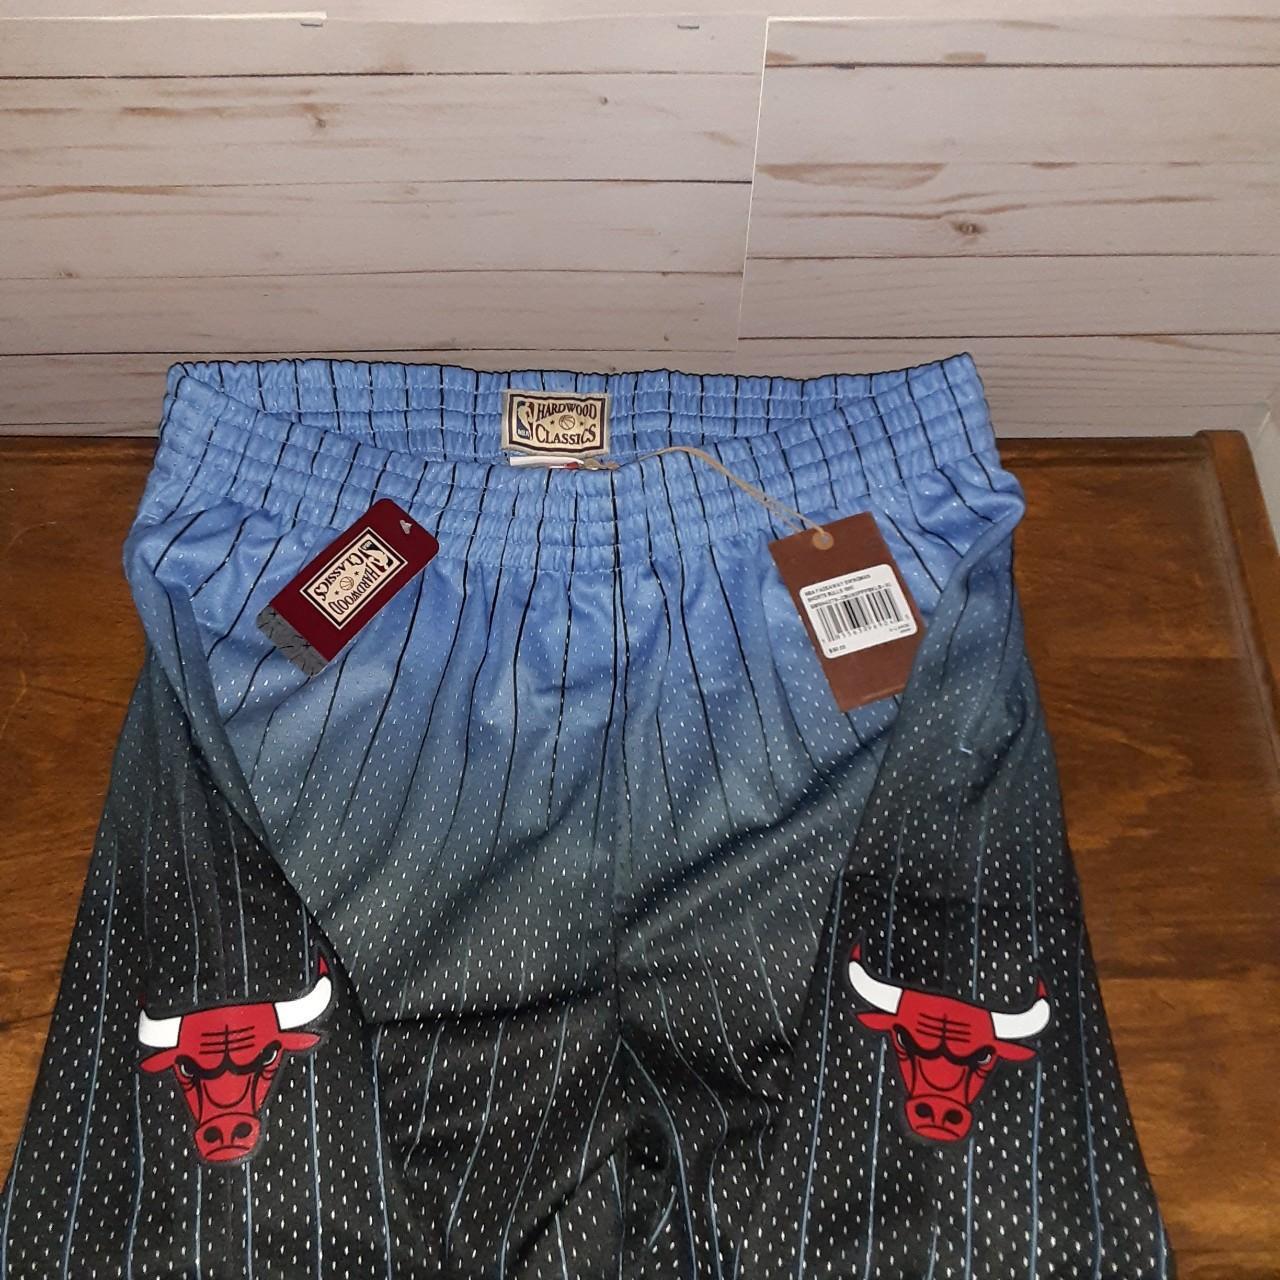 Authentic Chicago Bulls shorts by mitchell and - Depop